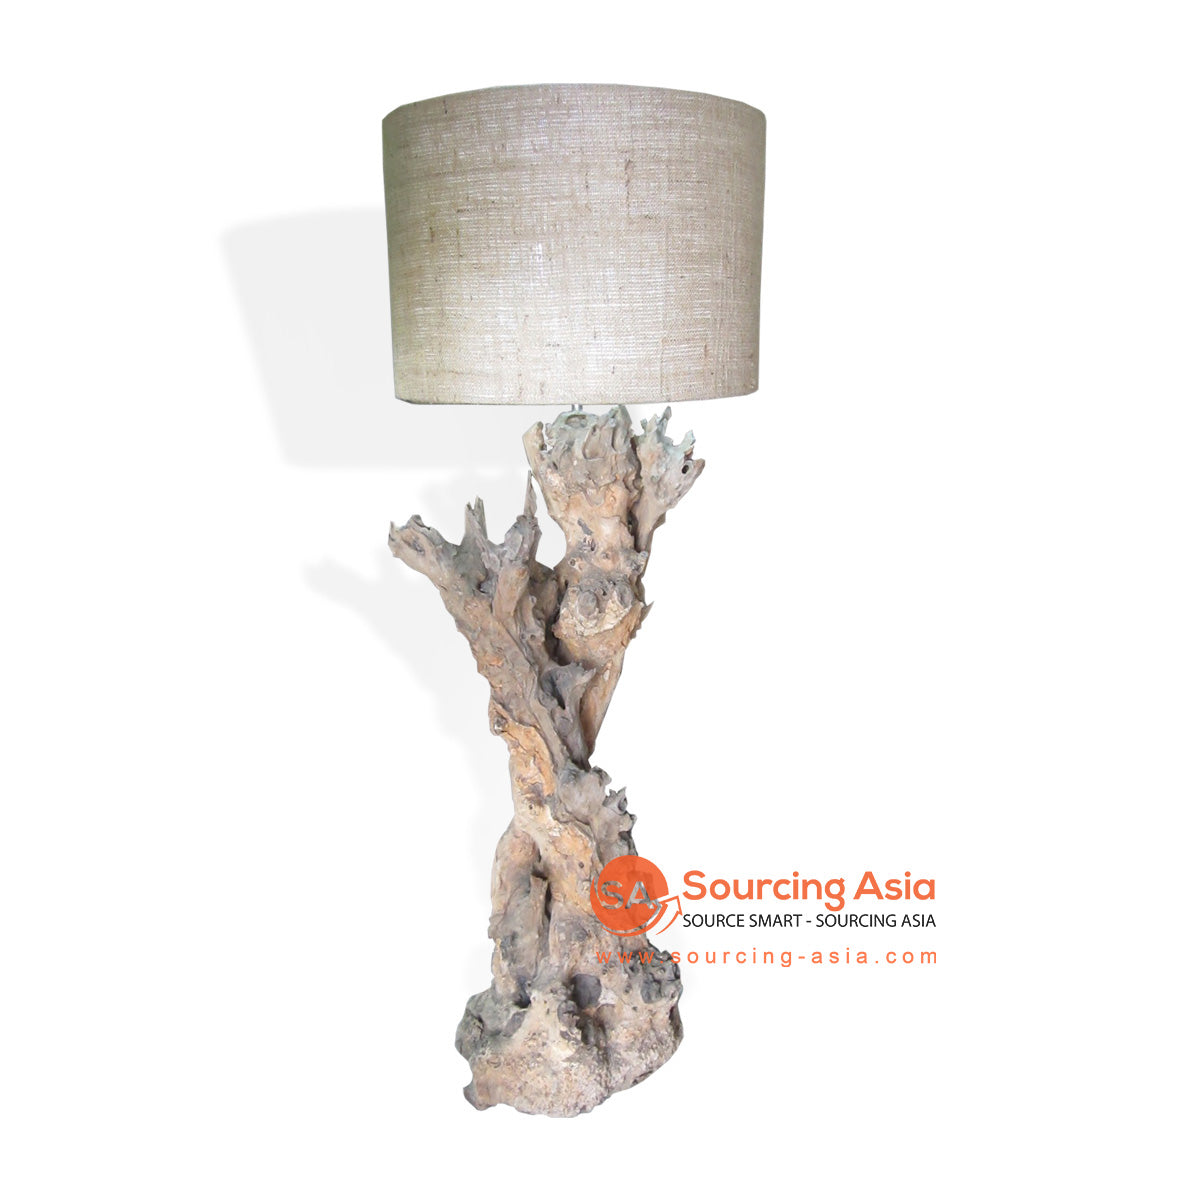 LB031 NATURAL WOODEN STANDING LAMP WITH NATURAL SHADE